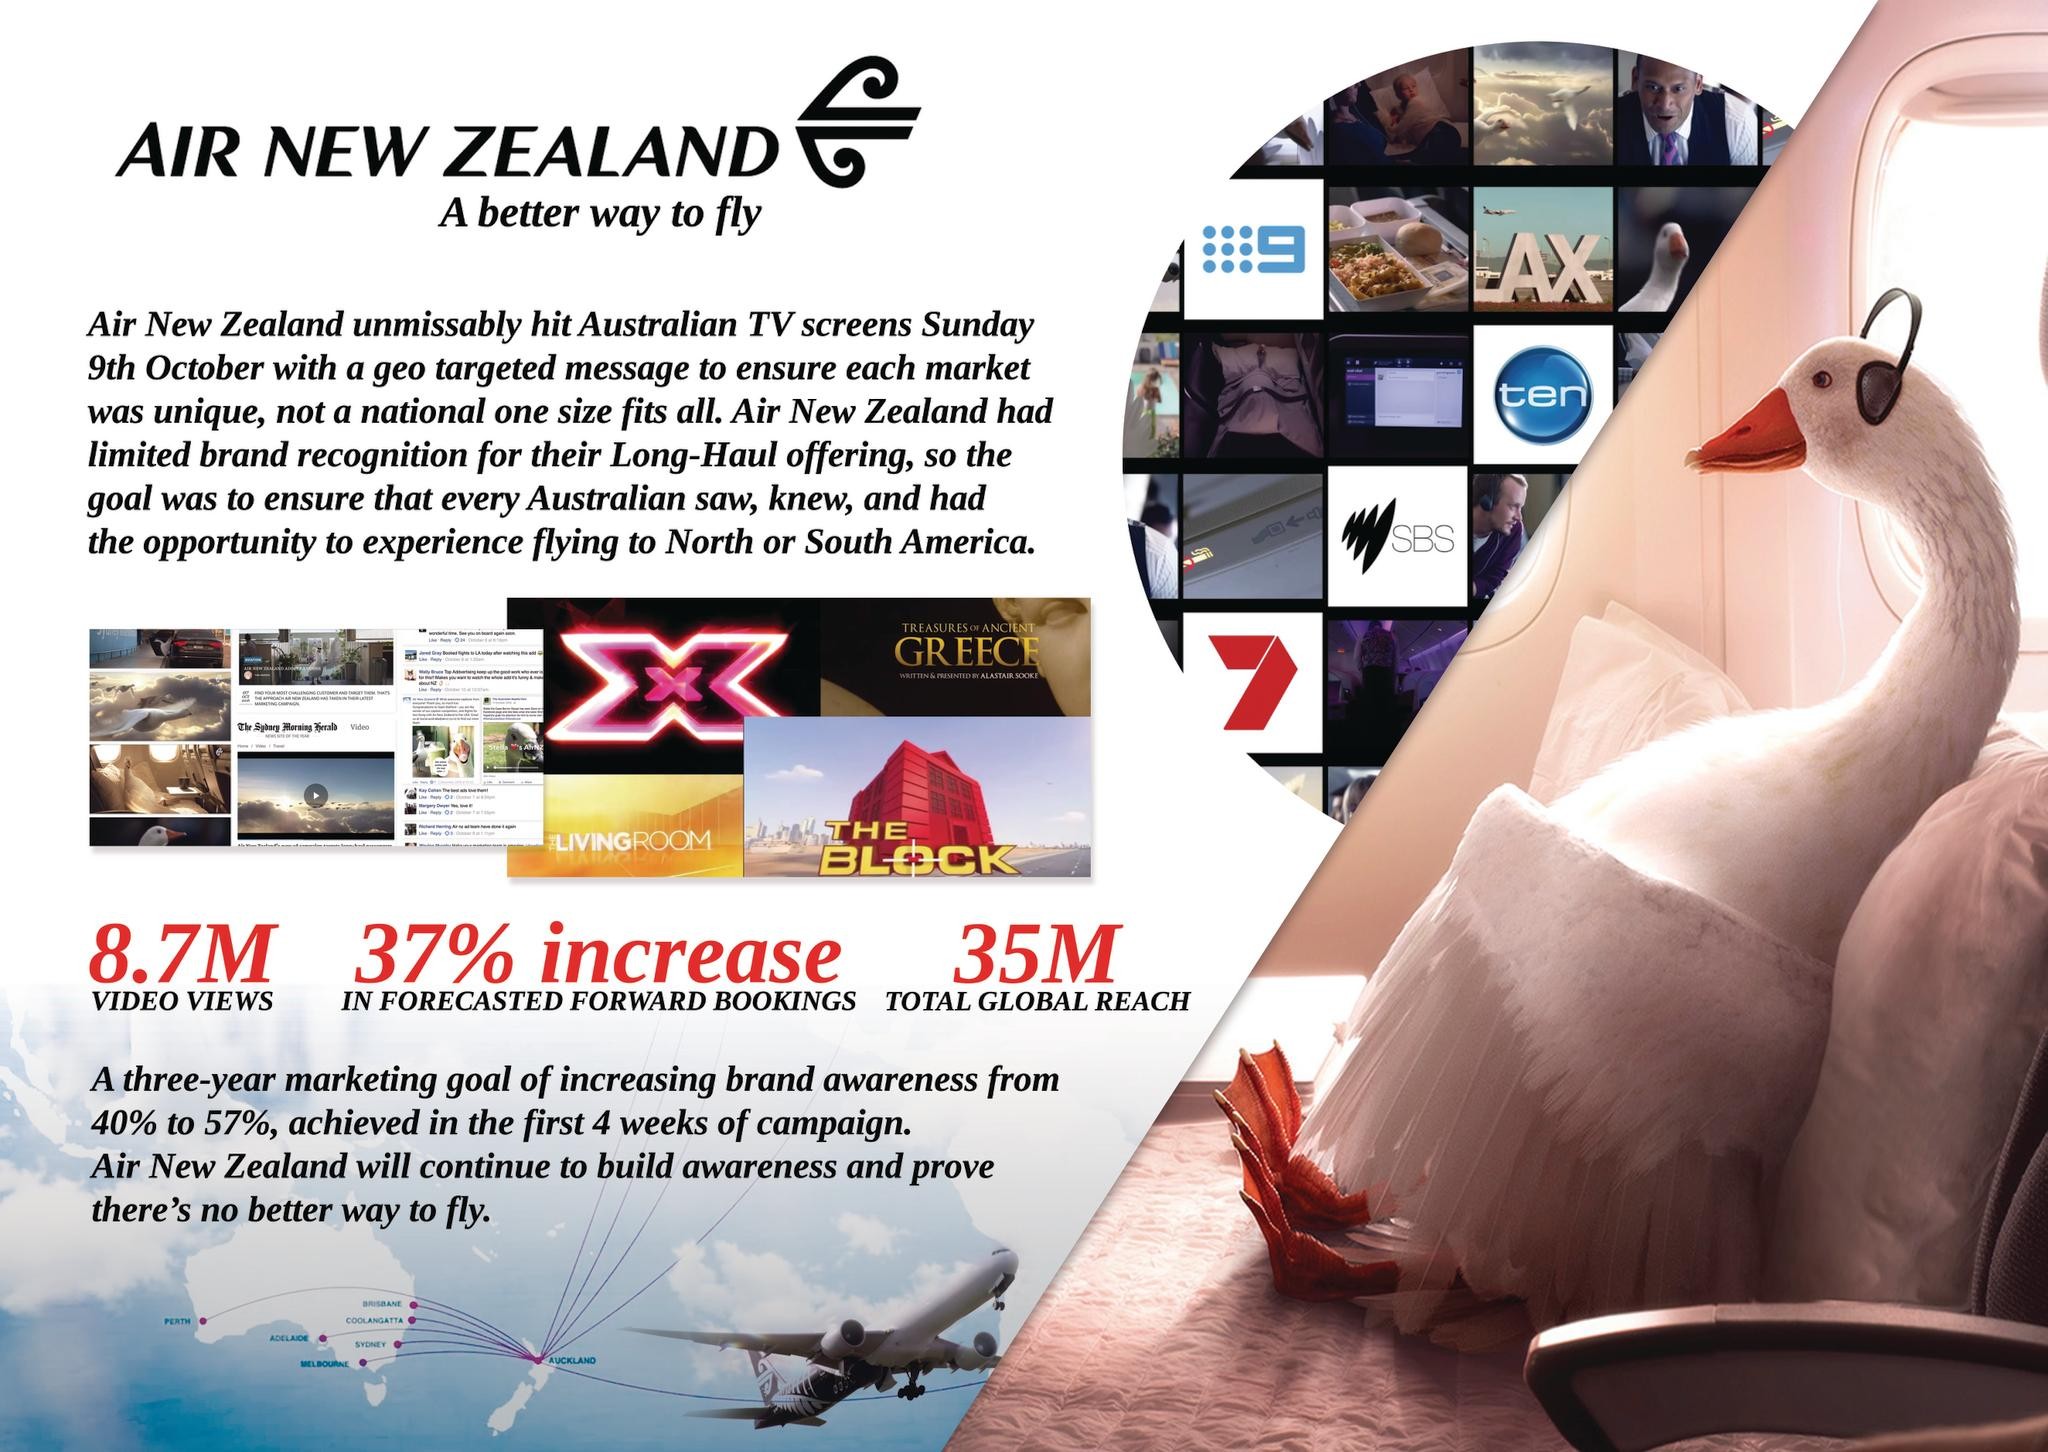 Air New Zealand - Better Way to Fly